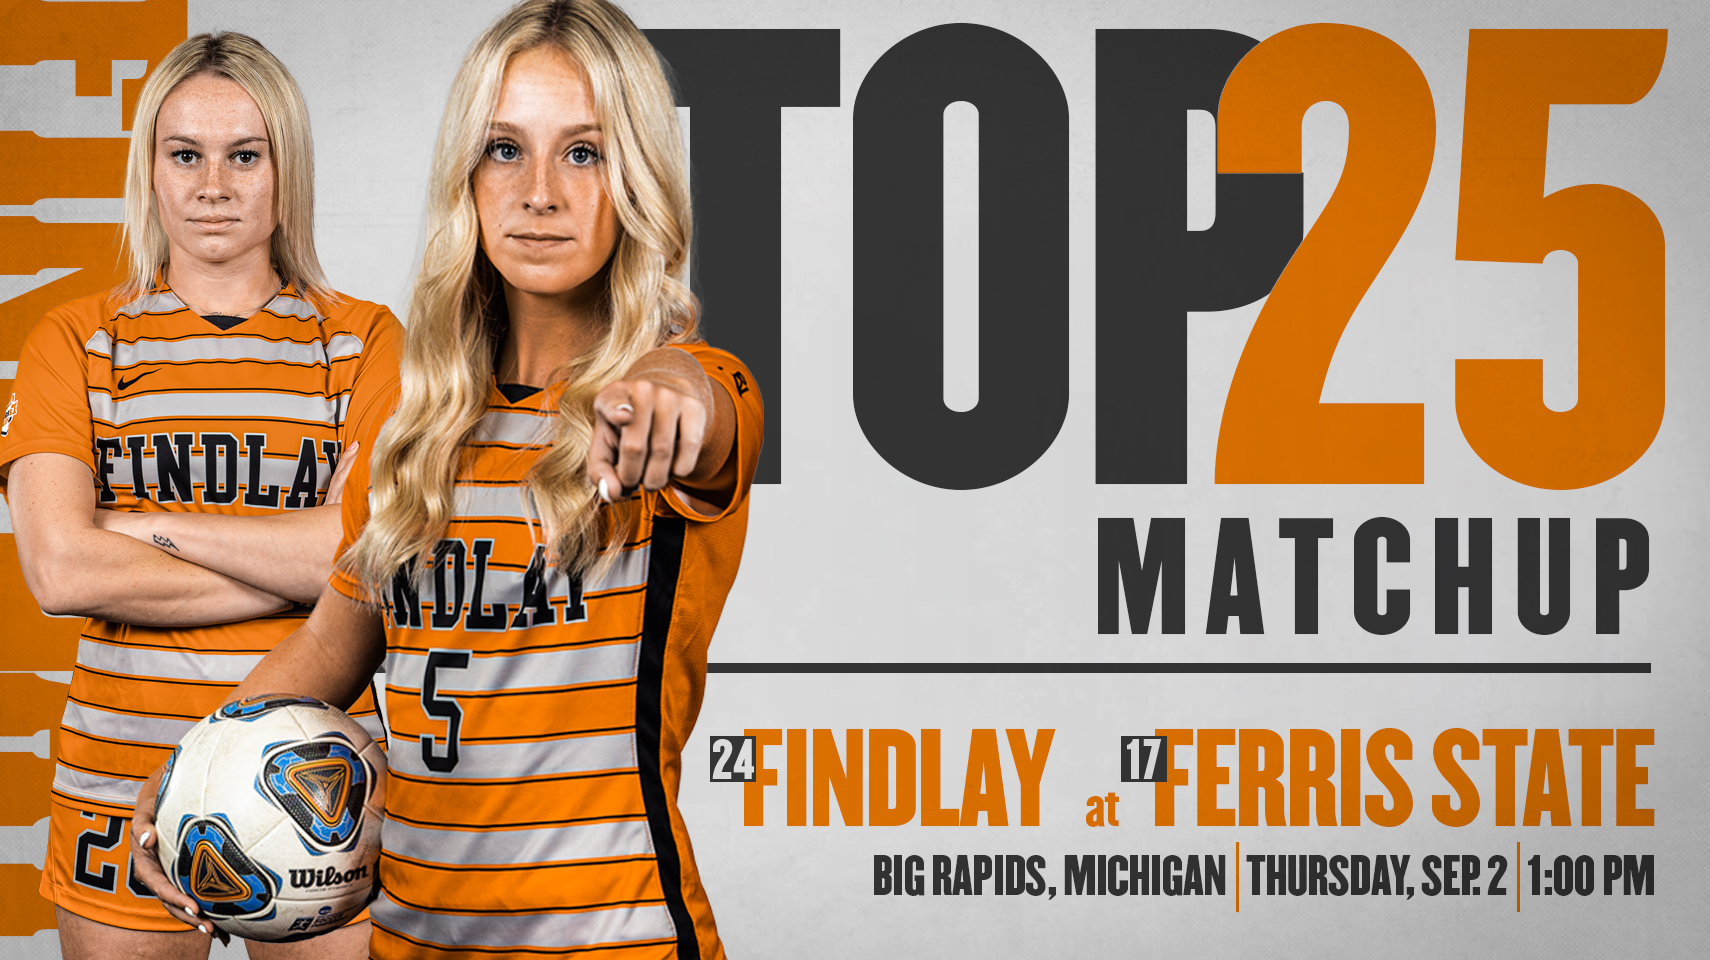 Findlay Heads to Ferris St. for Top-25 Matchup to Open Season